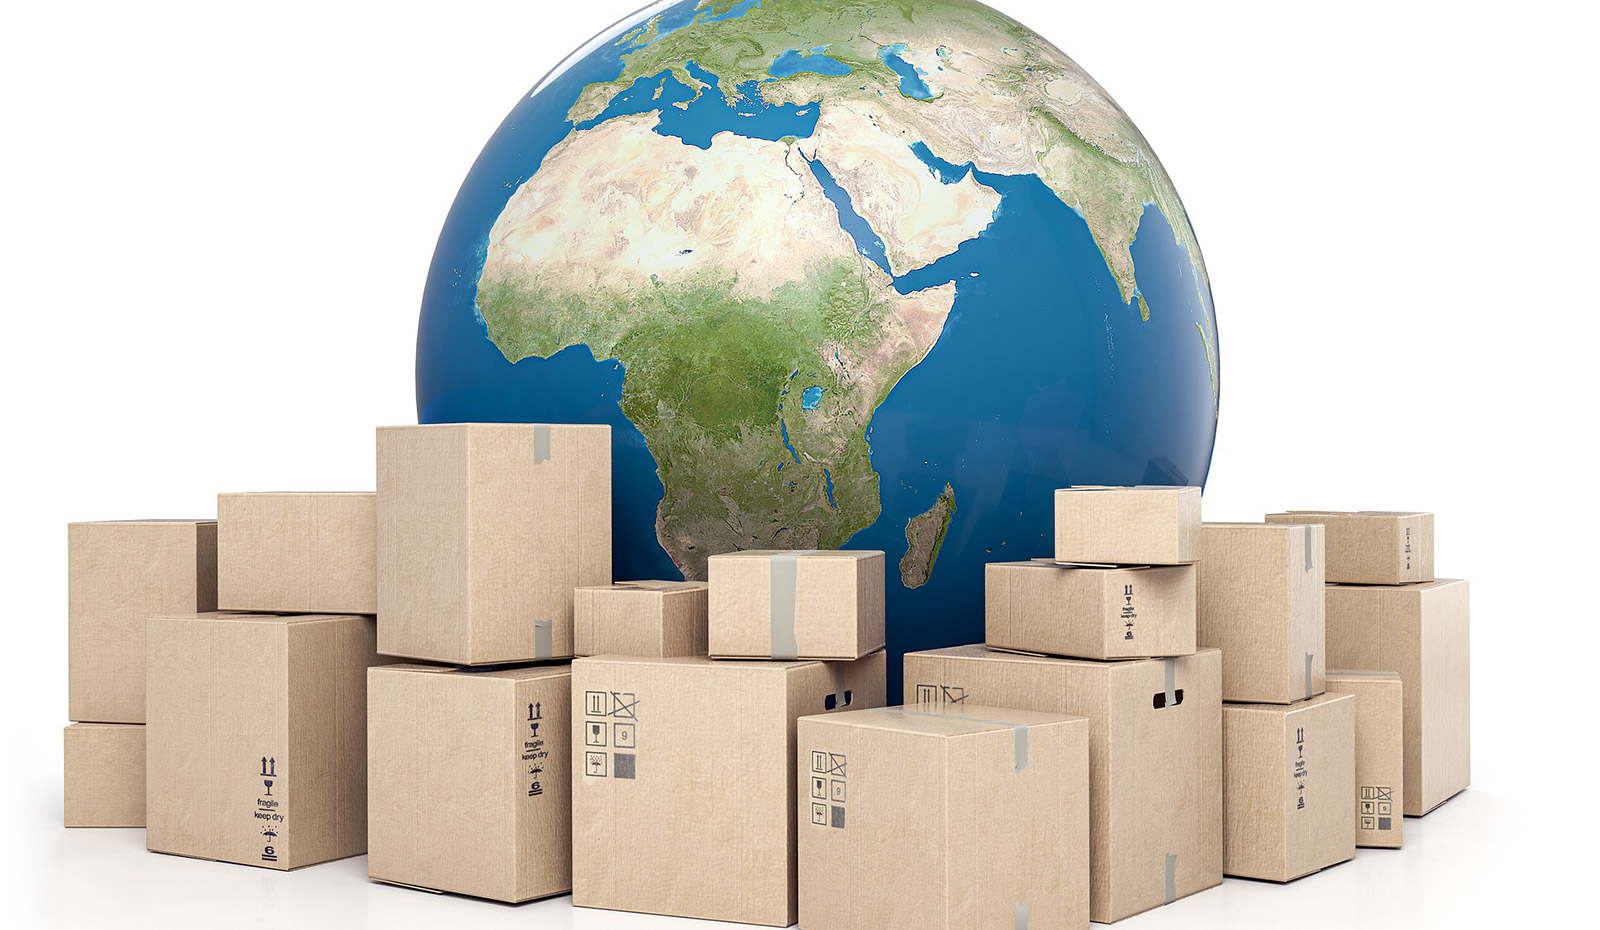 International packages arranged around a large globe.